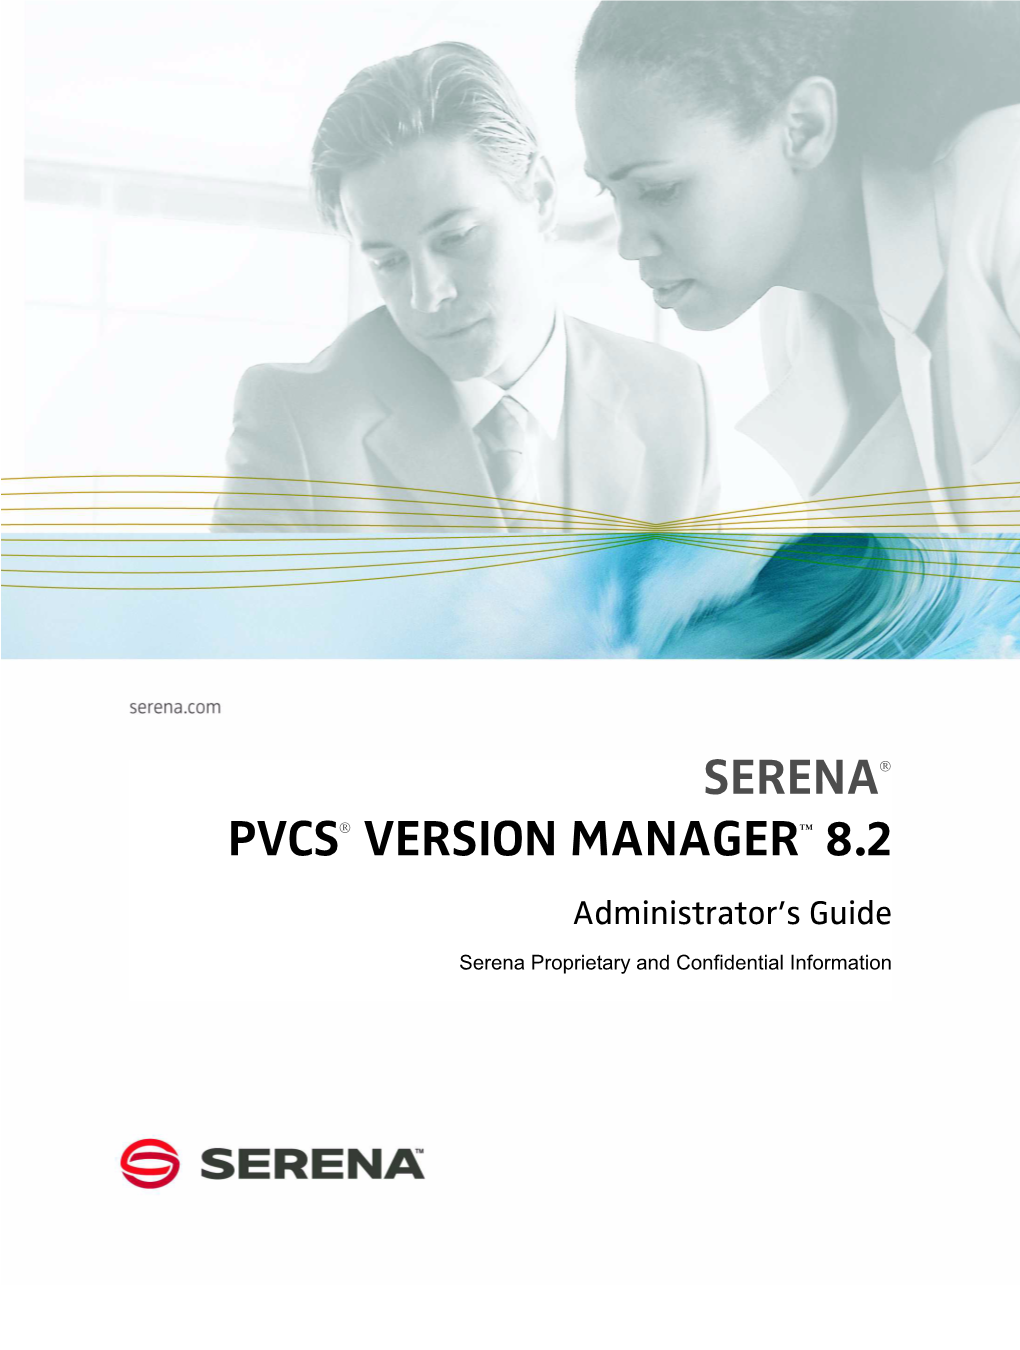 Serena PVCS Version Manager Administrator's Guide